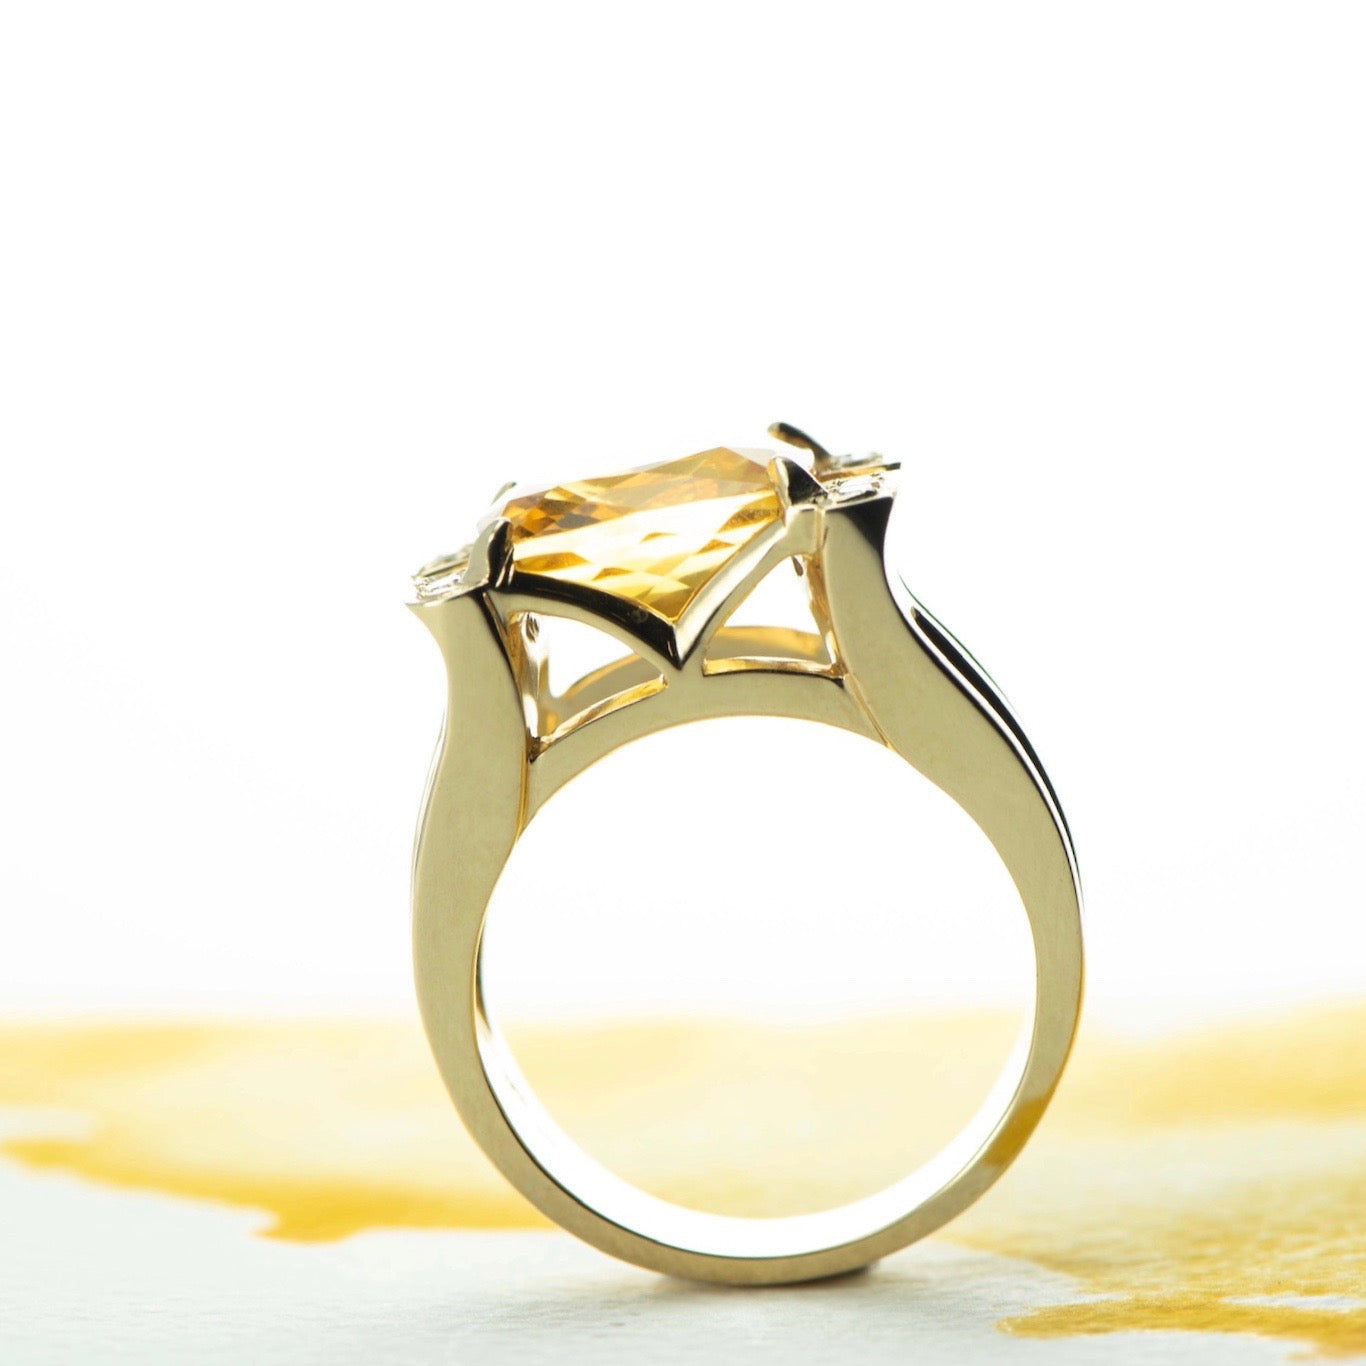 Tulip design Citrine and gold ring made by hand in our Christchurch workshop at Canterbury Jewellers